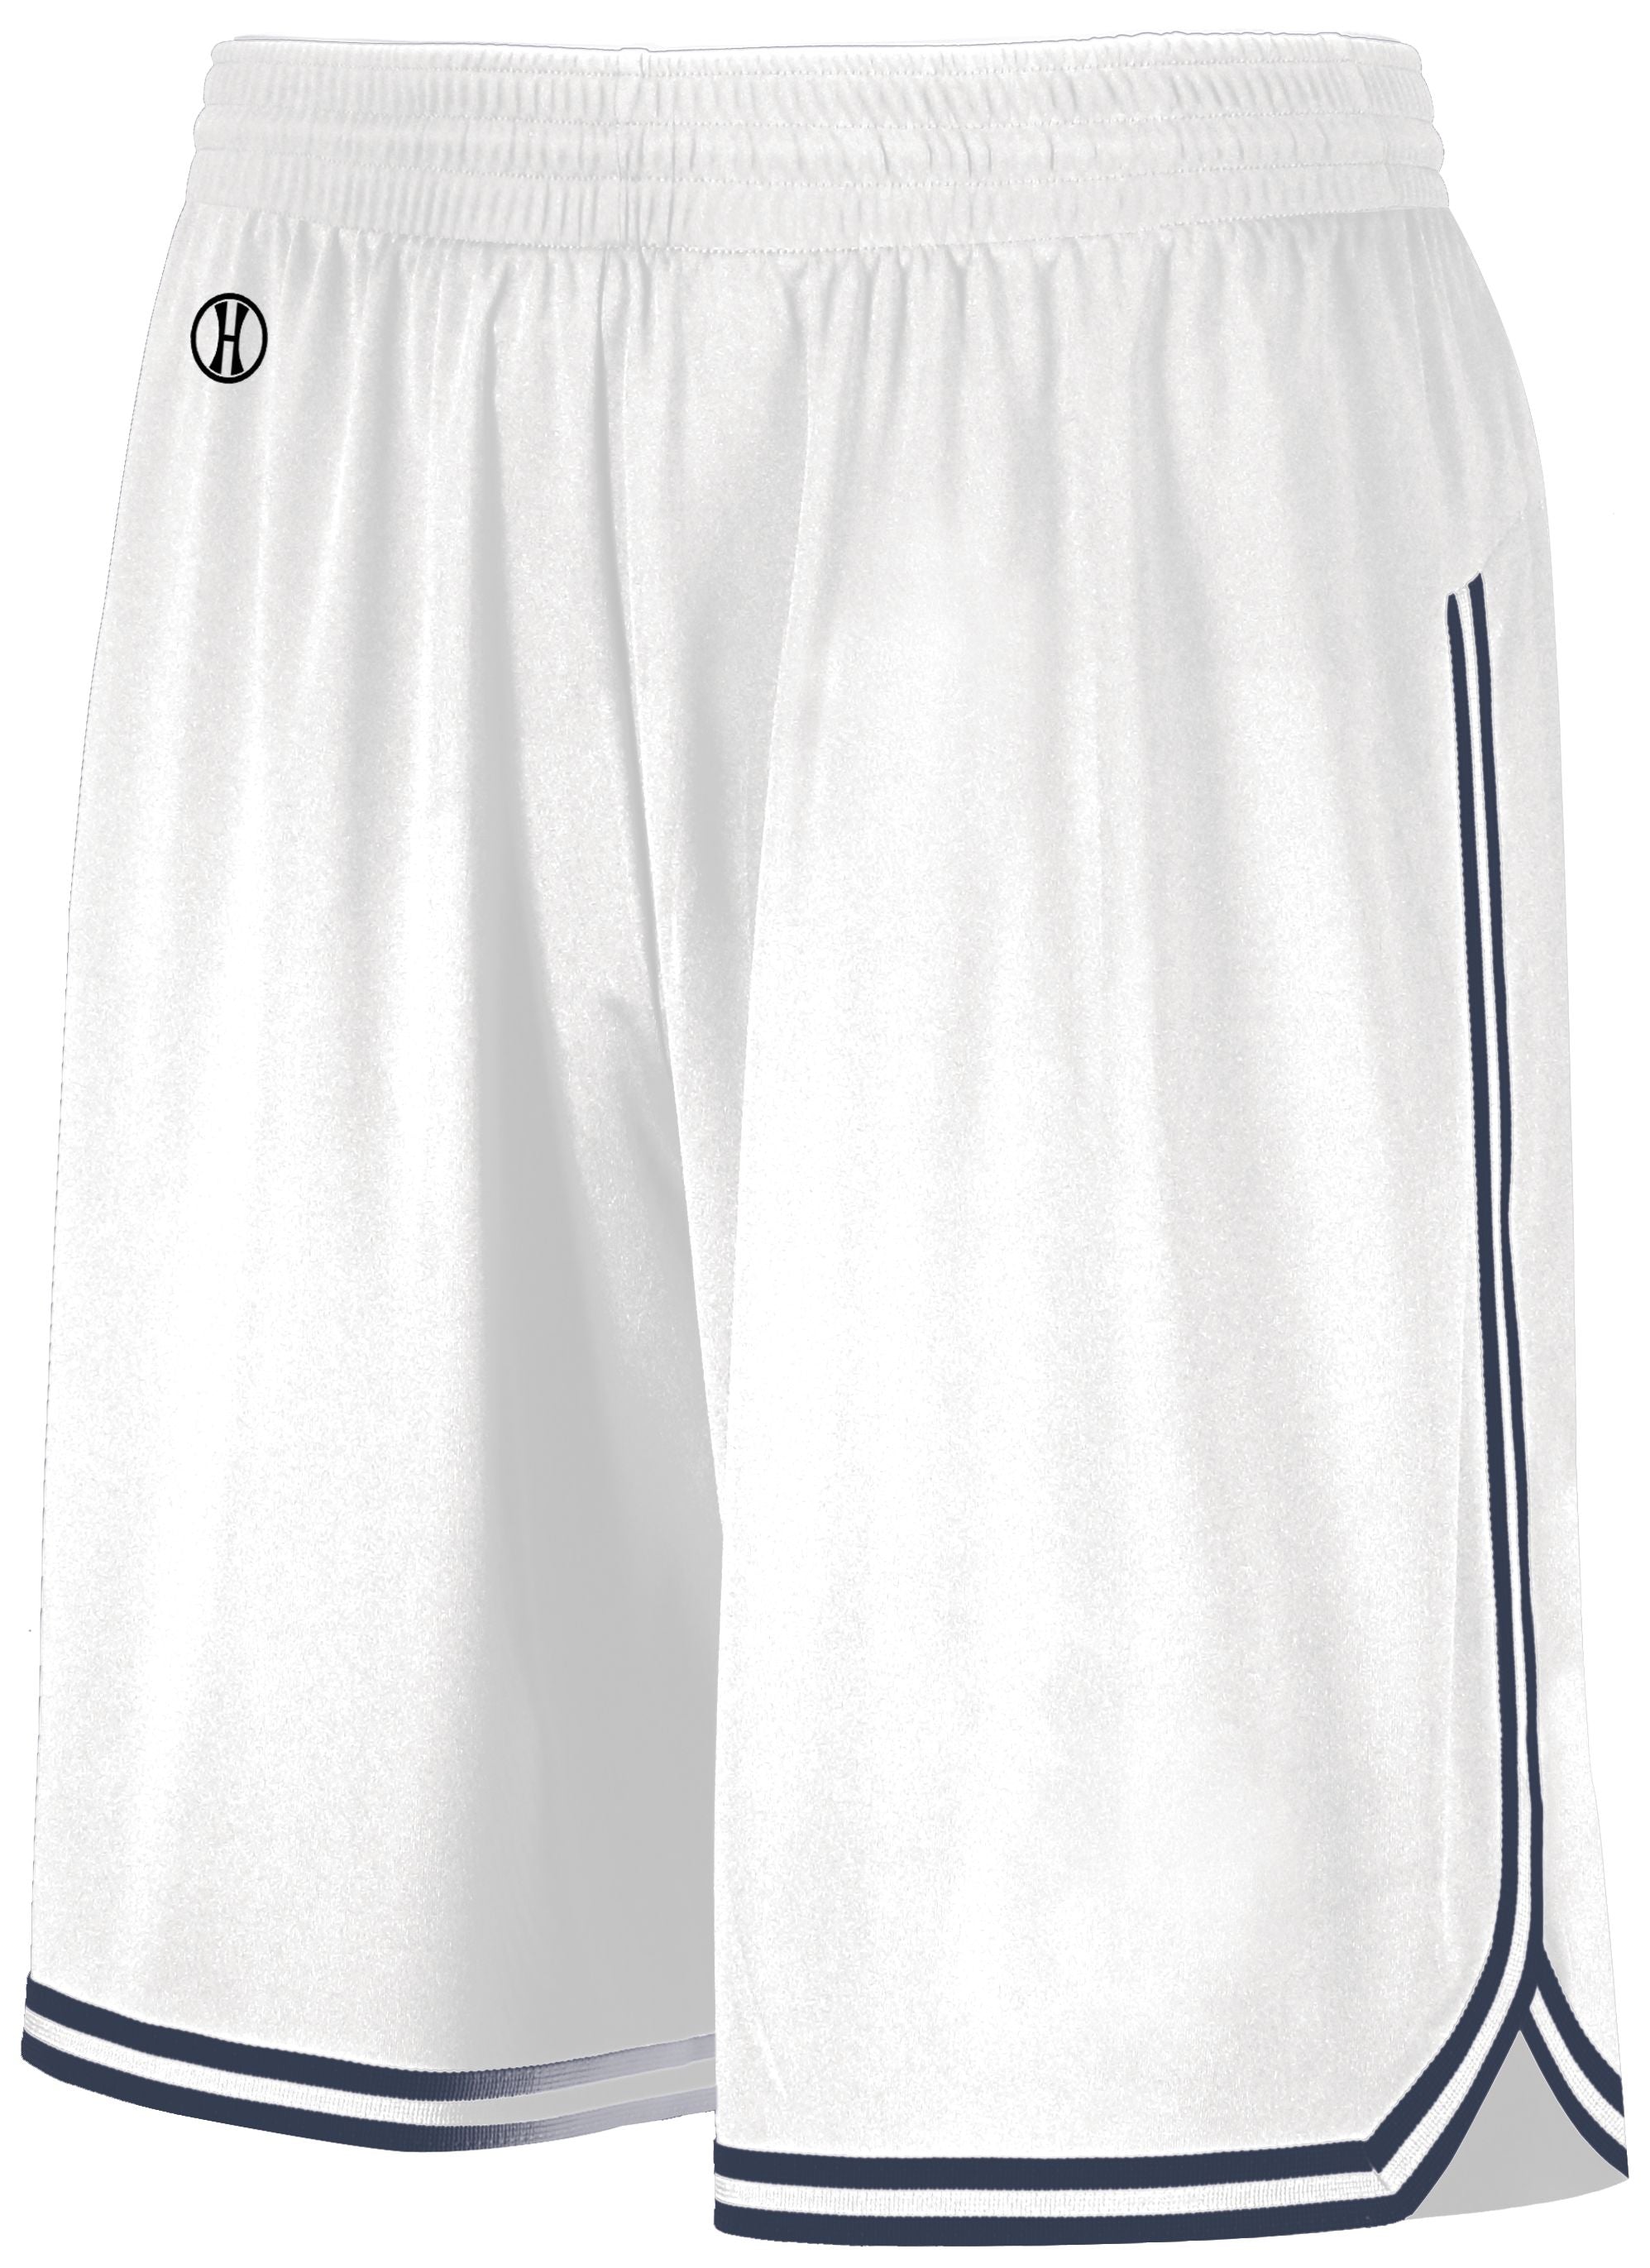 Holloway Youth Retro Basketball Shorts in White/Navy  -Part of the Youth, Youth-Shorts, Basketball, Holloway, All-Sports, All-Sports-1 product lines at KanaleyCreations.com